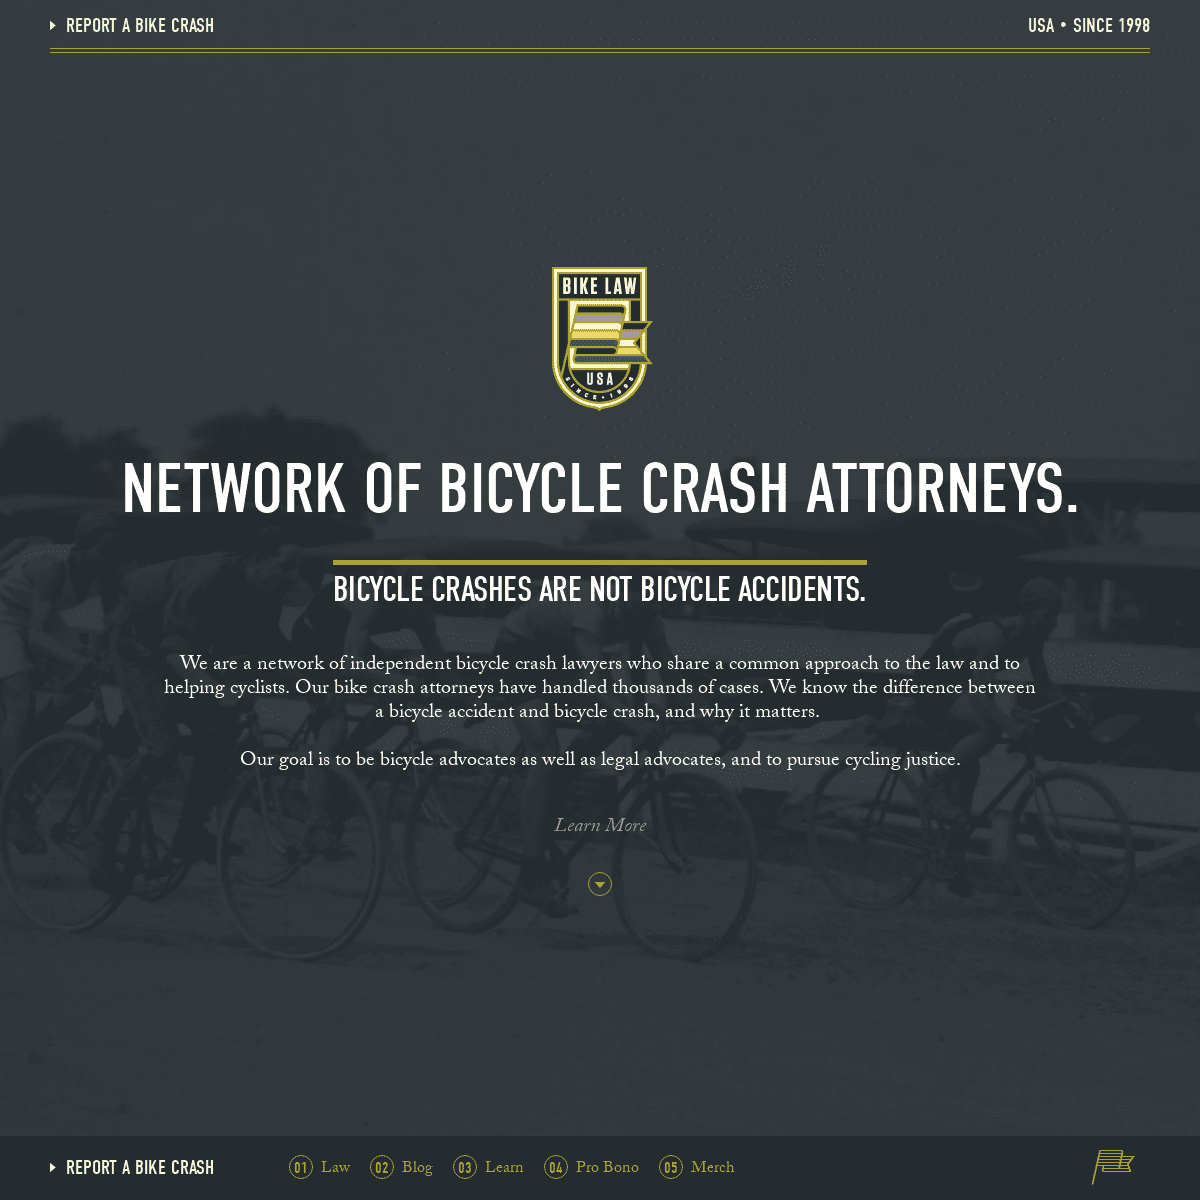 Bike Law - A Network of Bicycle Accident Lawyers